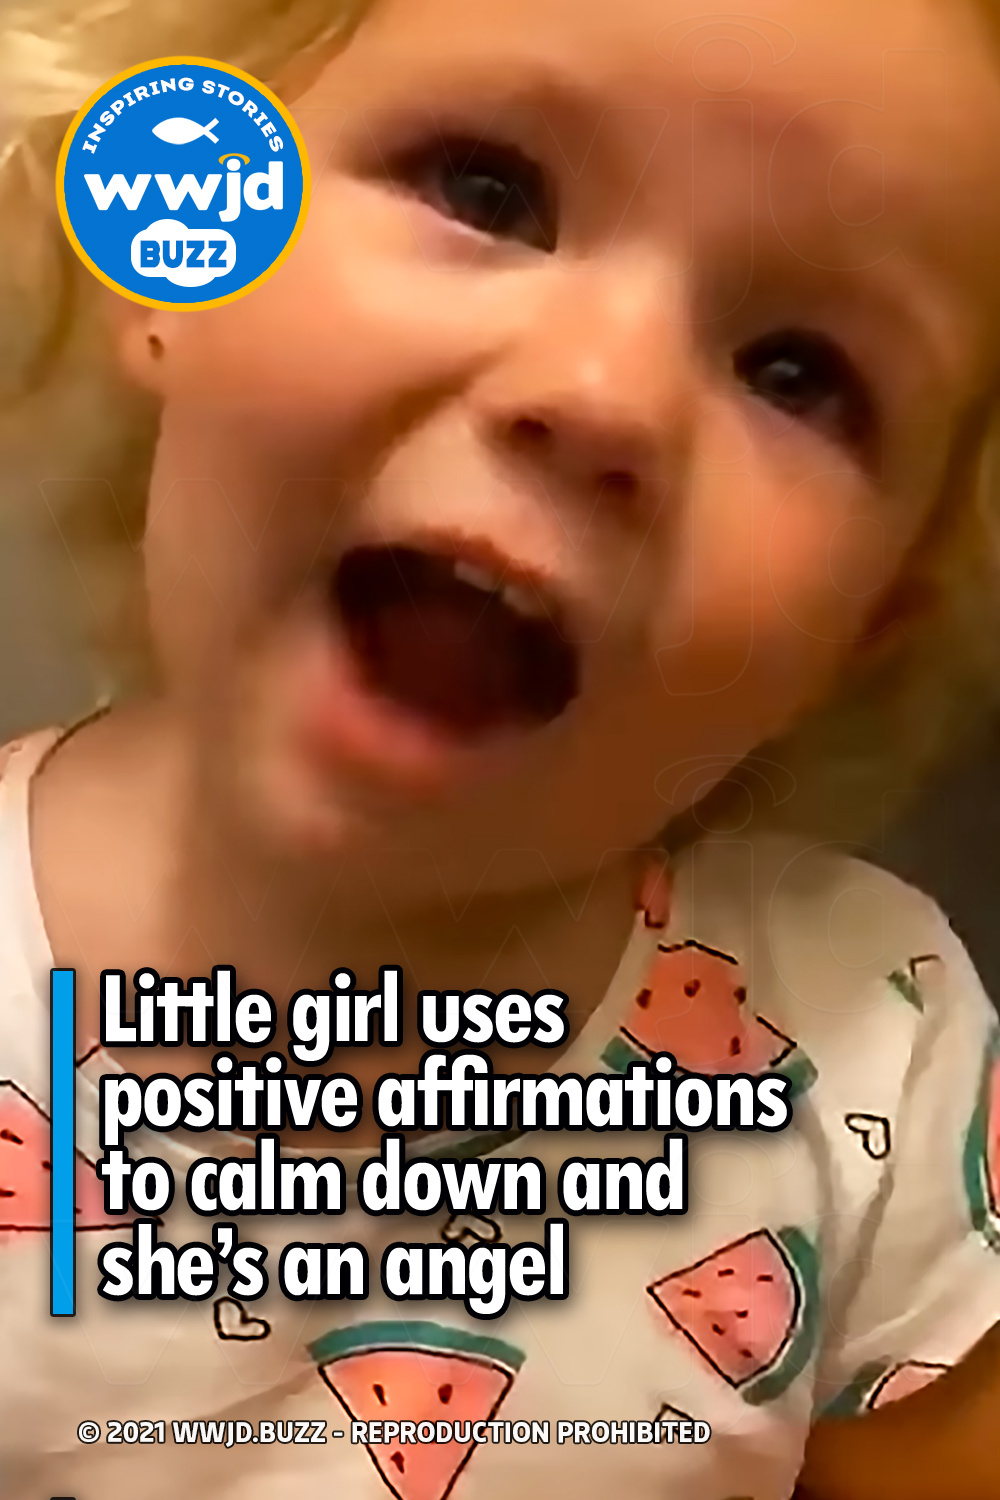 Little girl uses positive affirmations to calm down and she’s an angel